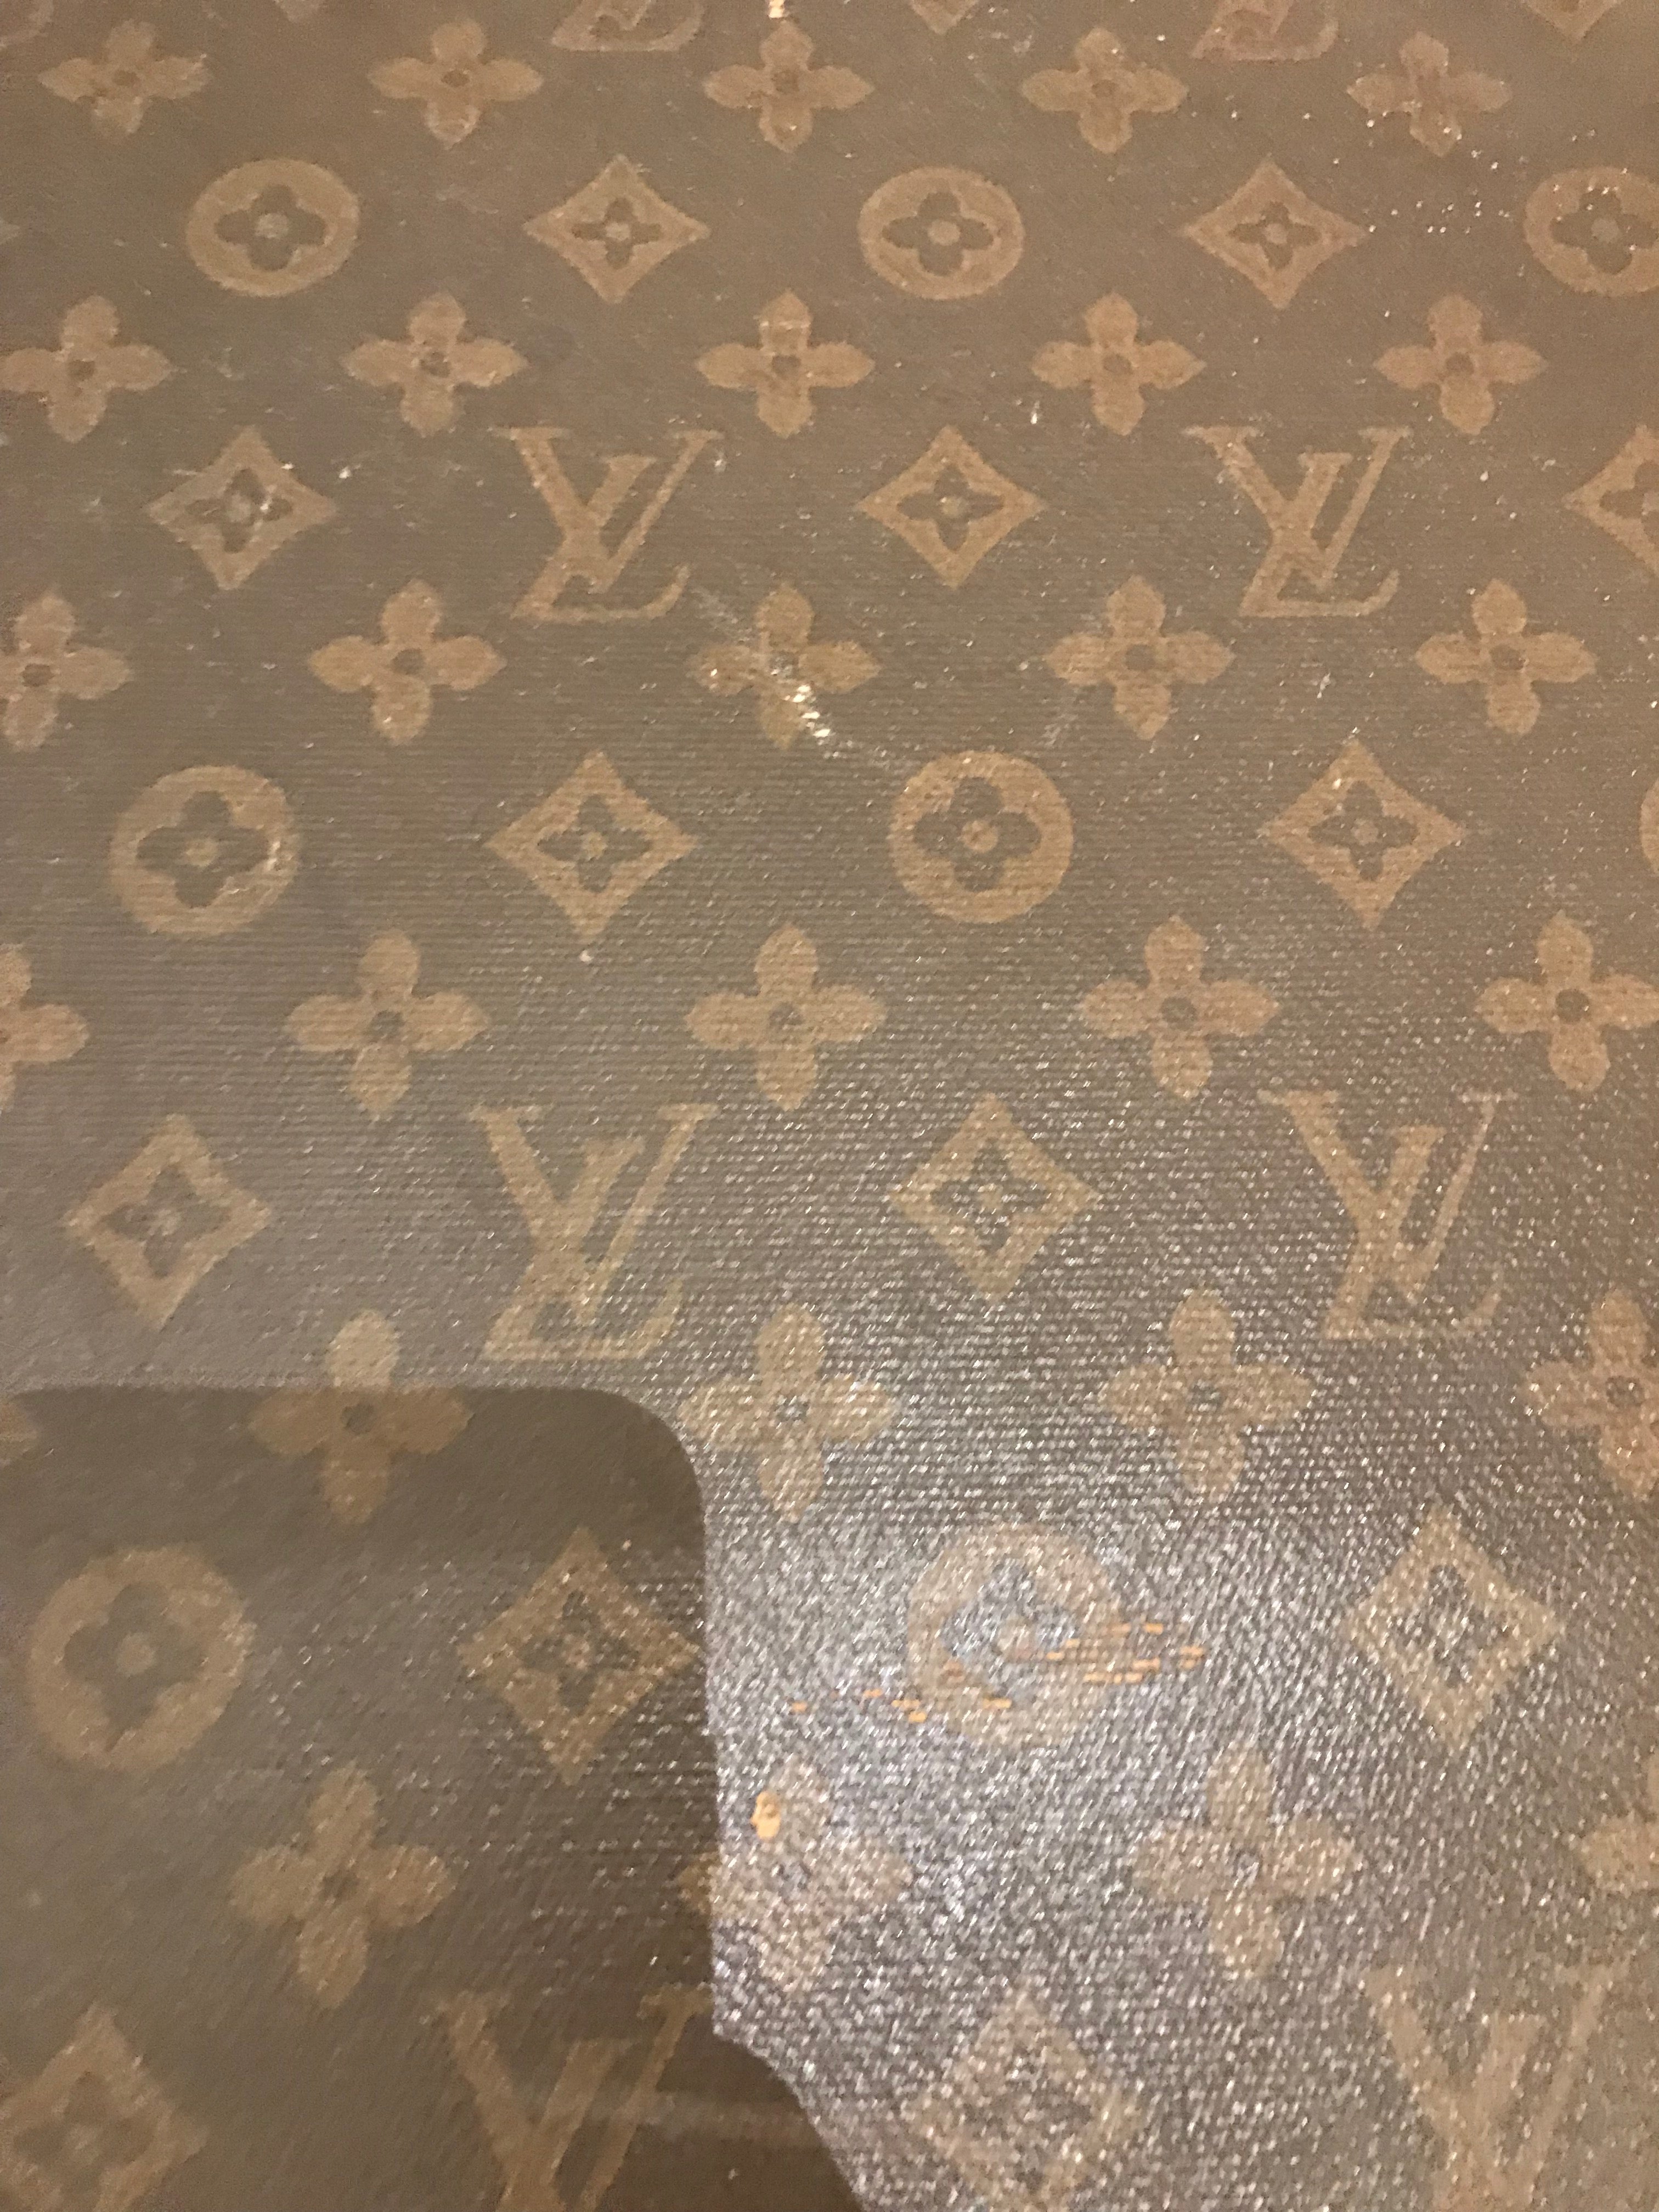 Louis Vuitton Suitcase Trunk with Key – 1 of a Kind NJ